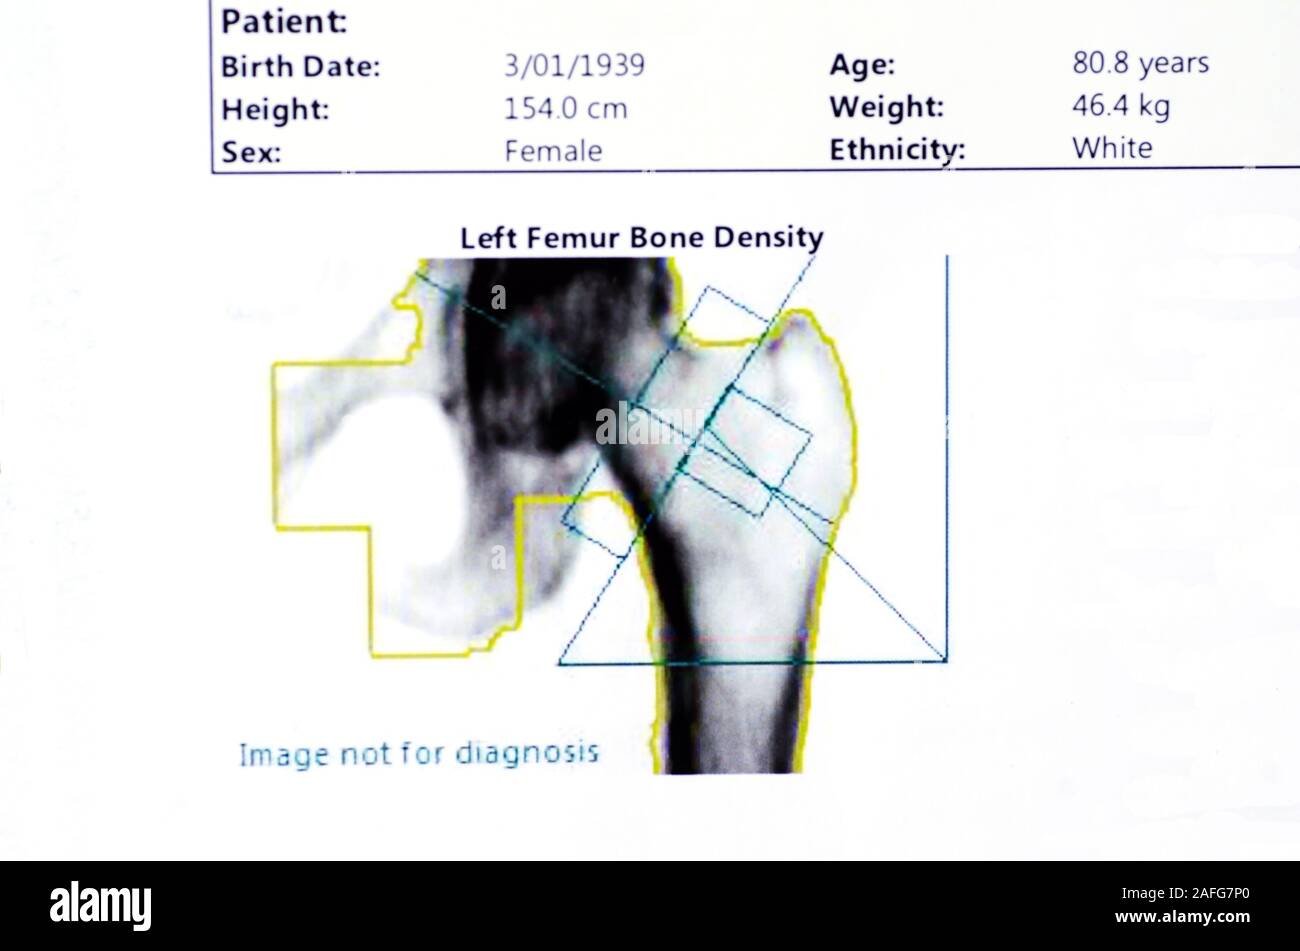 Bone Density Scan of left Femur of a female patient aged 80 years. Stock Photo